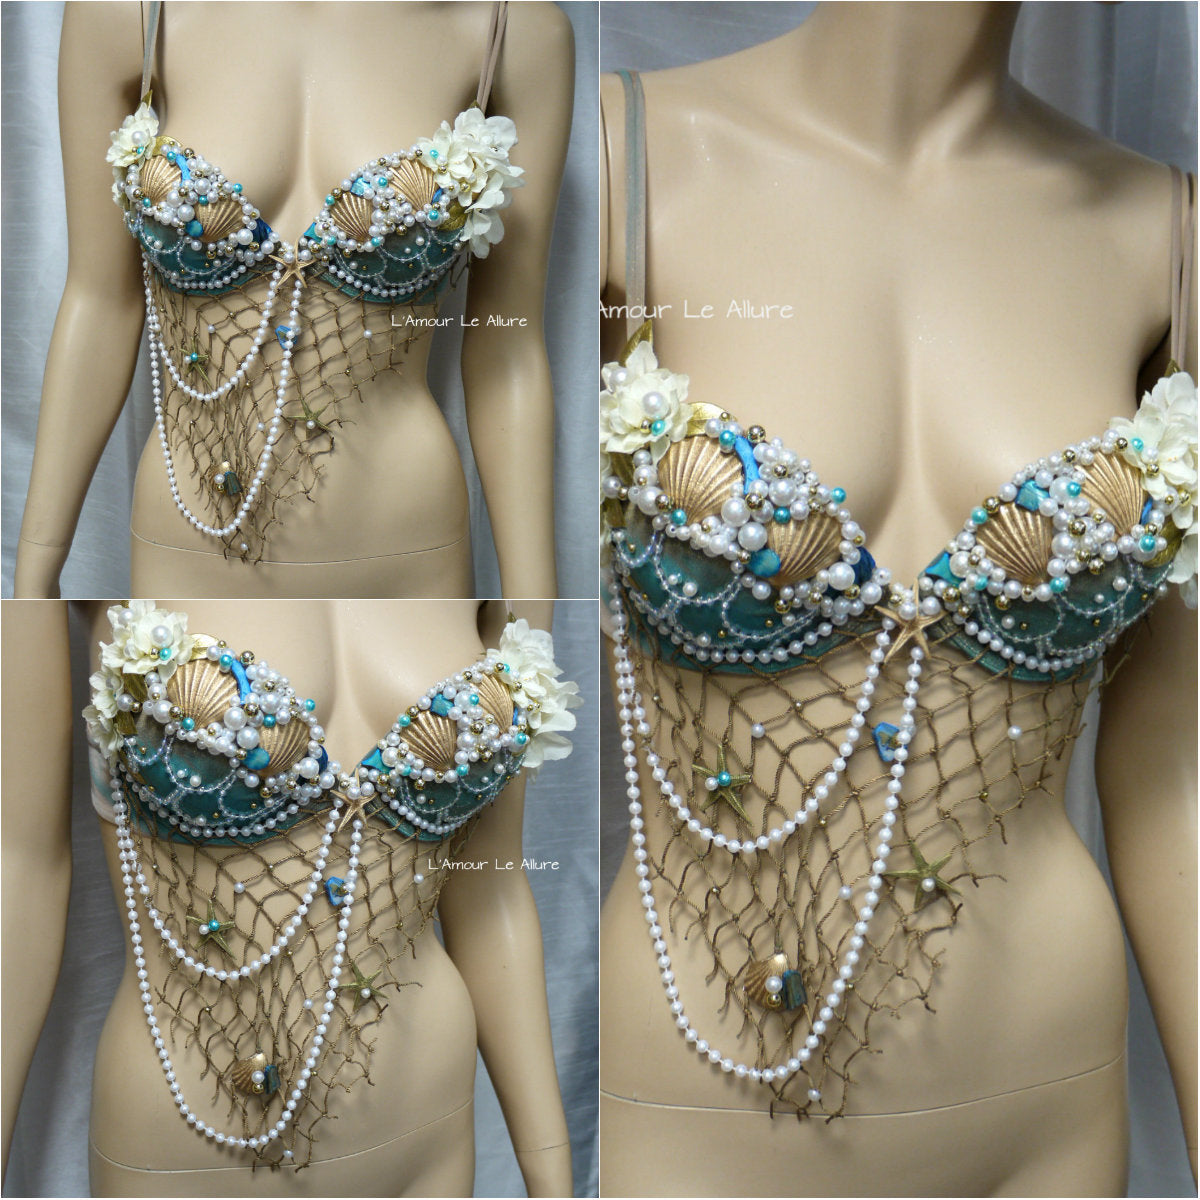 Delicate Dripping in Gold Turquoise Mermaid Bra Top